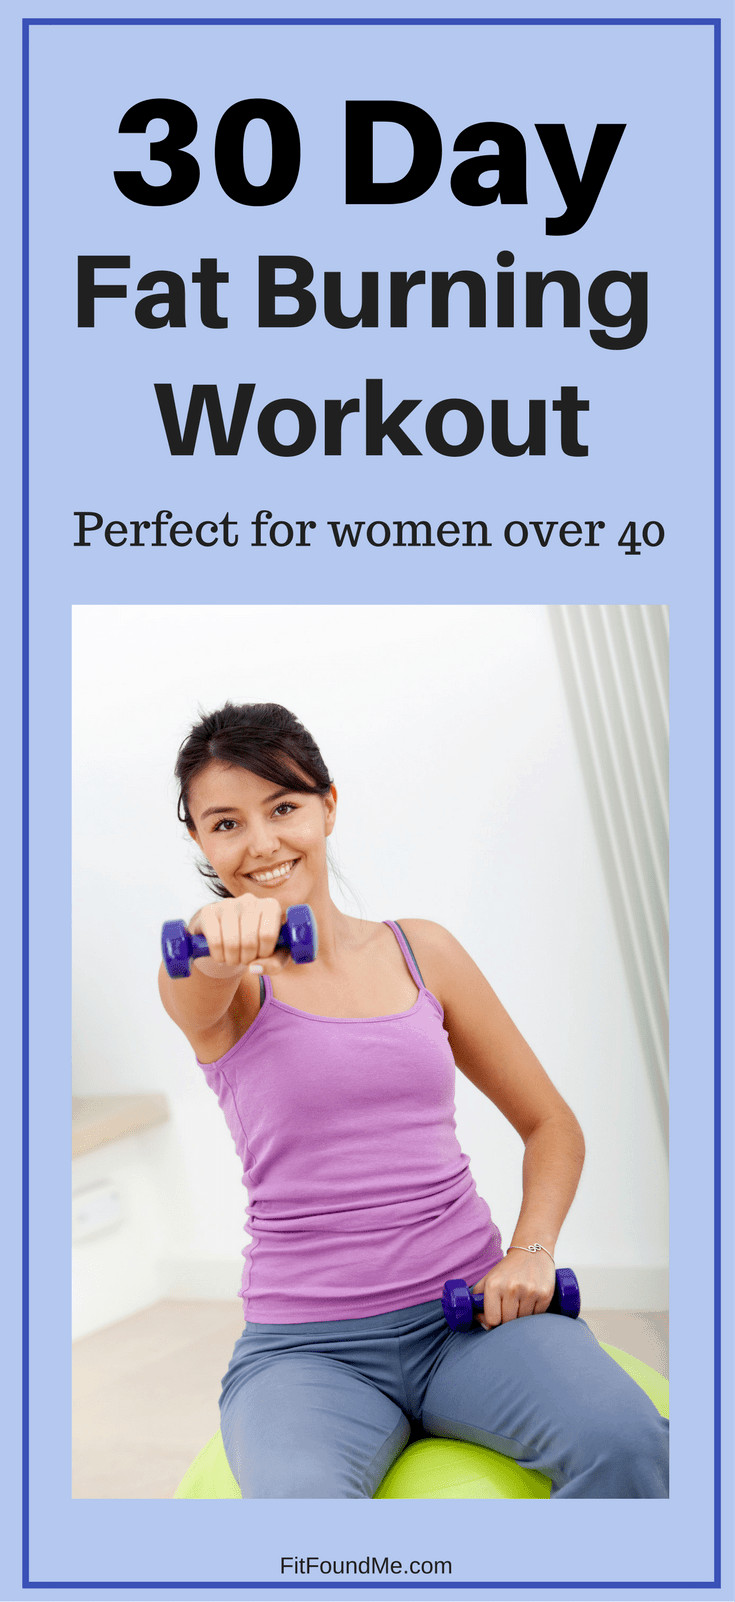 30 Day Fat Burning Workout
 Lose Weight With This 30 Day Workout Fat Burning Plan